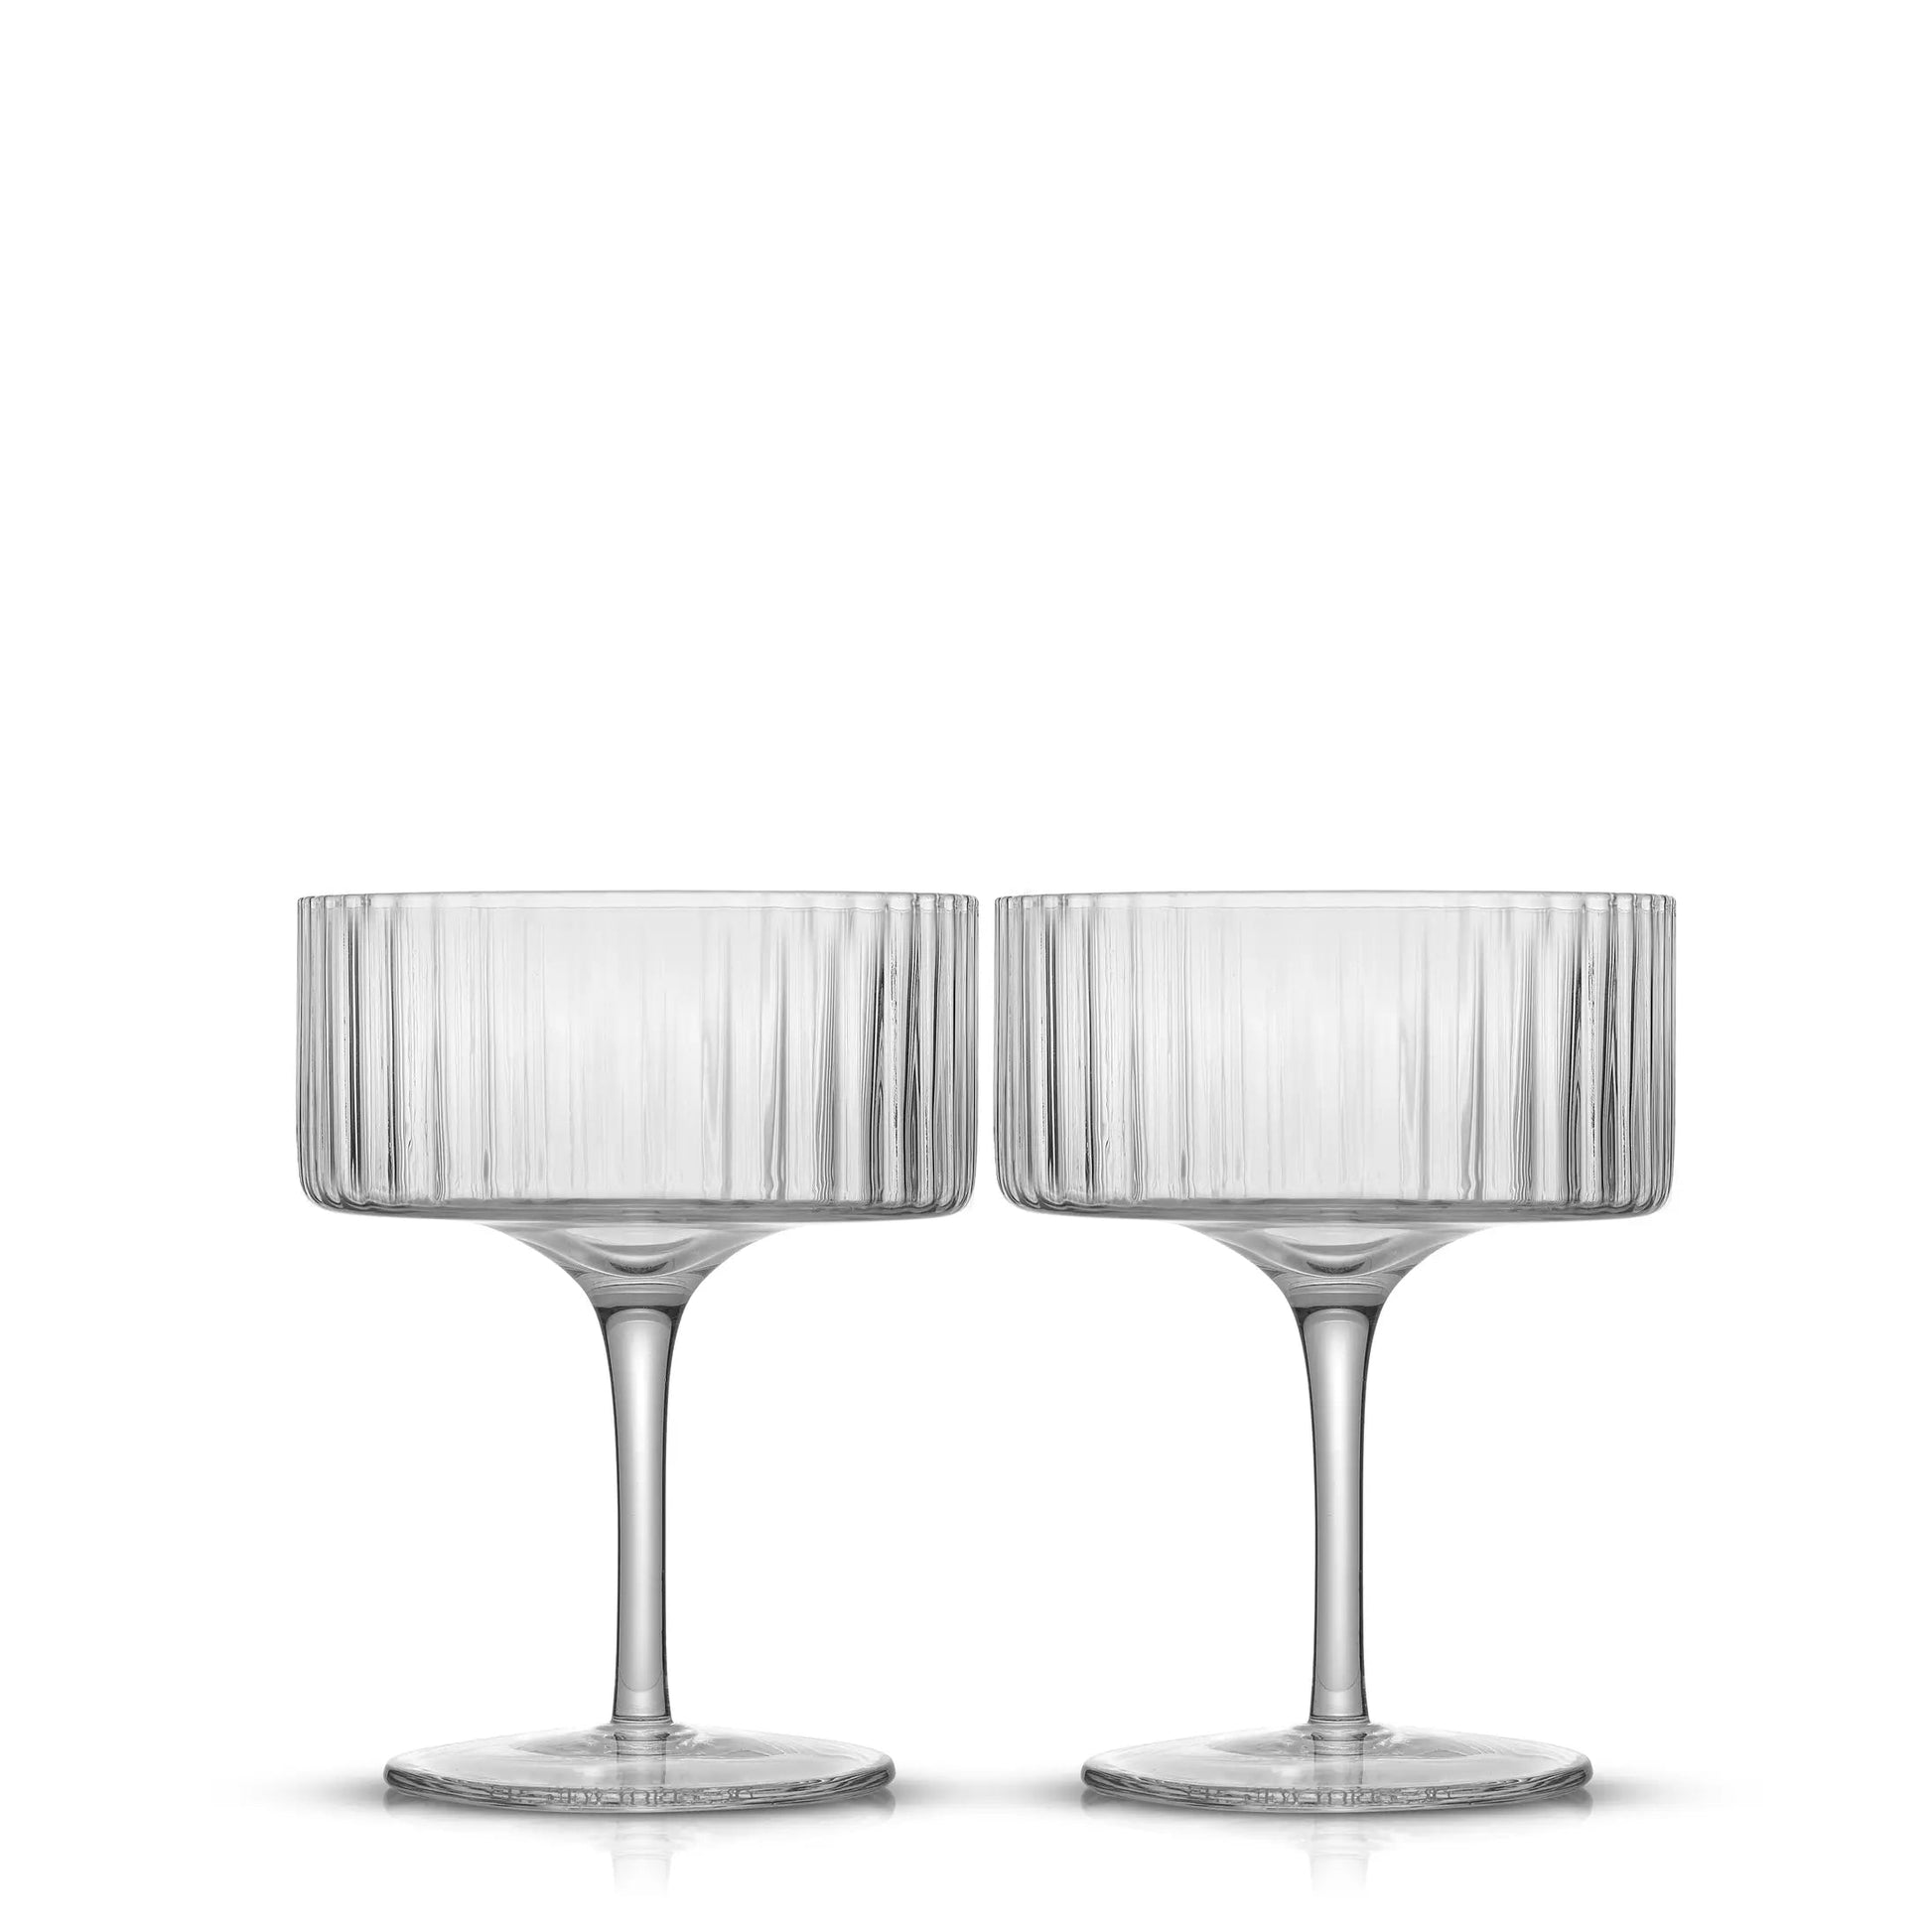 ‘Elle’ Fluted Cylinder Martini Coupe Glass, Set of 2 - EcoLuxe Furnishings